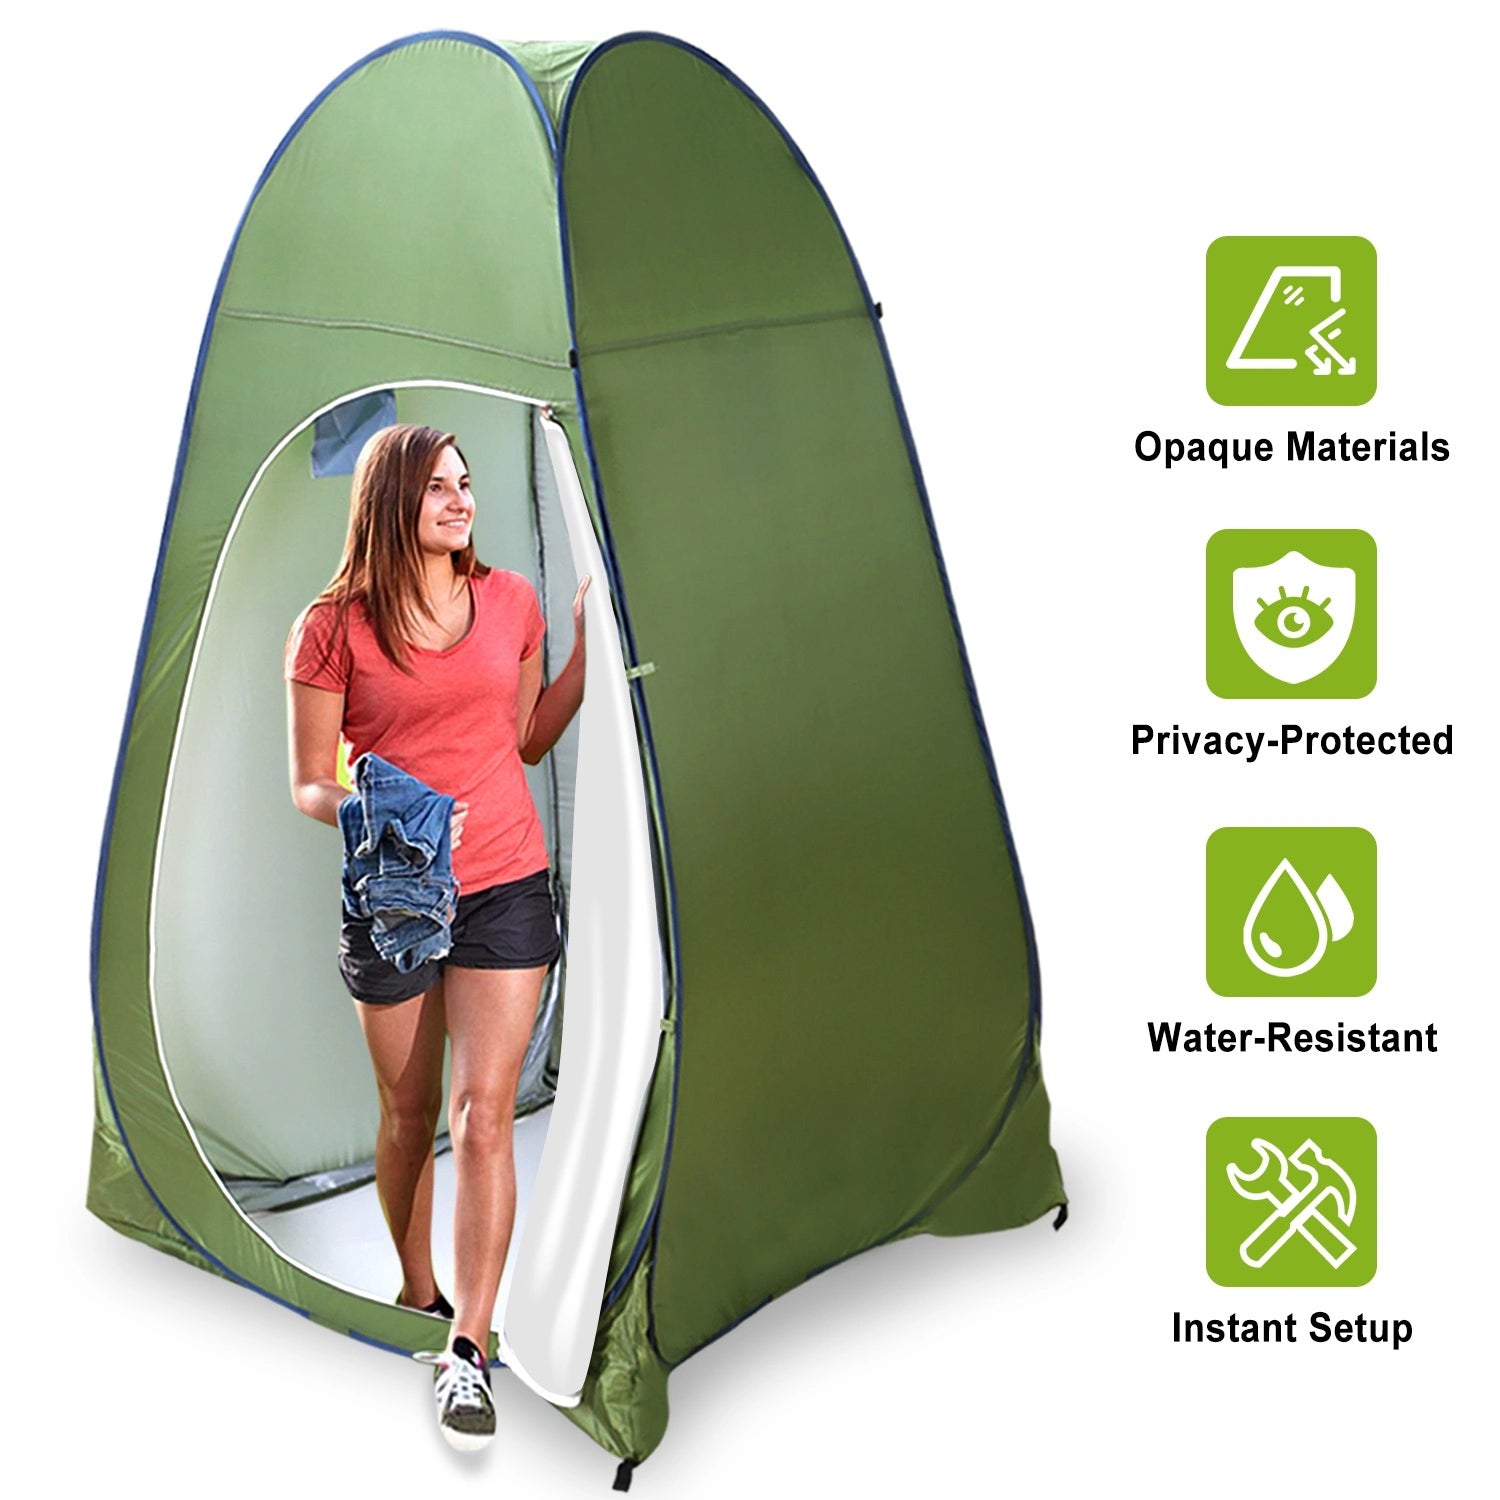 Camping Toilet Pop Up Changing Tent - Outdoor Large Travel Portable Shower 1-Person Privacy Tent for Toilet